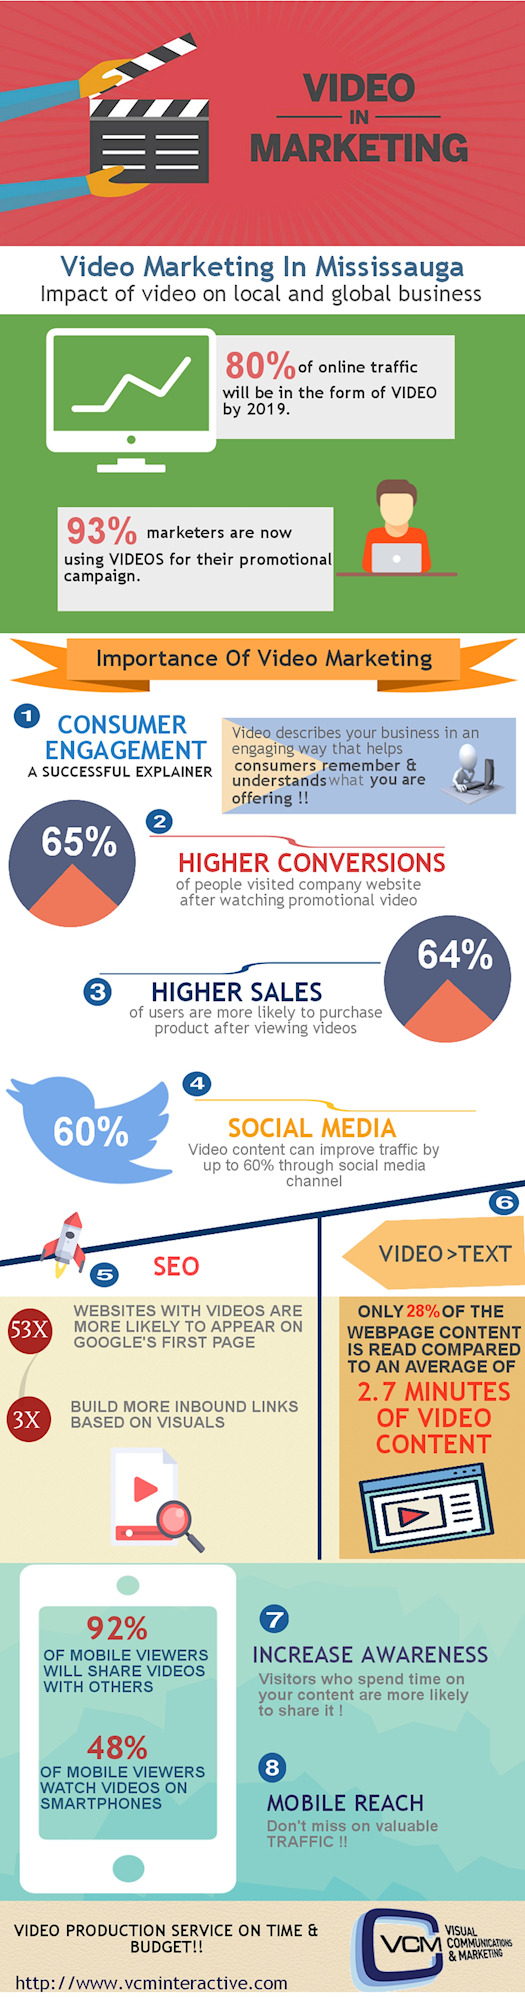 Importance of Video Marketing For Your Business